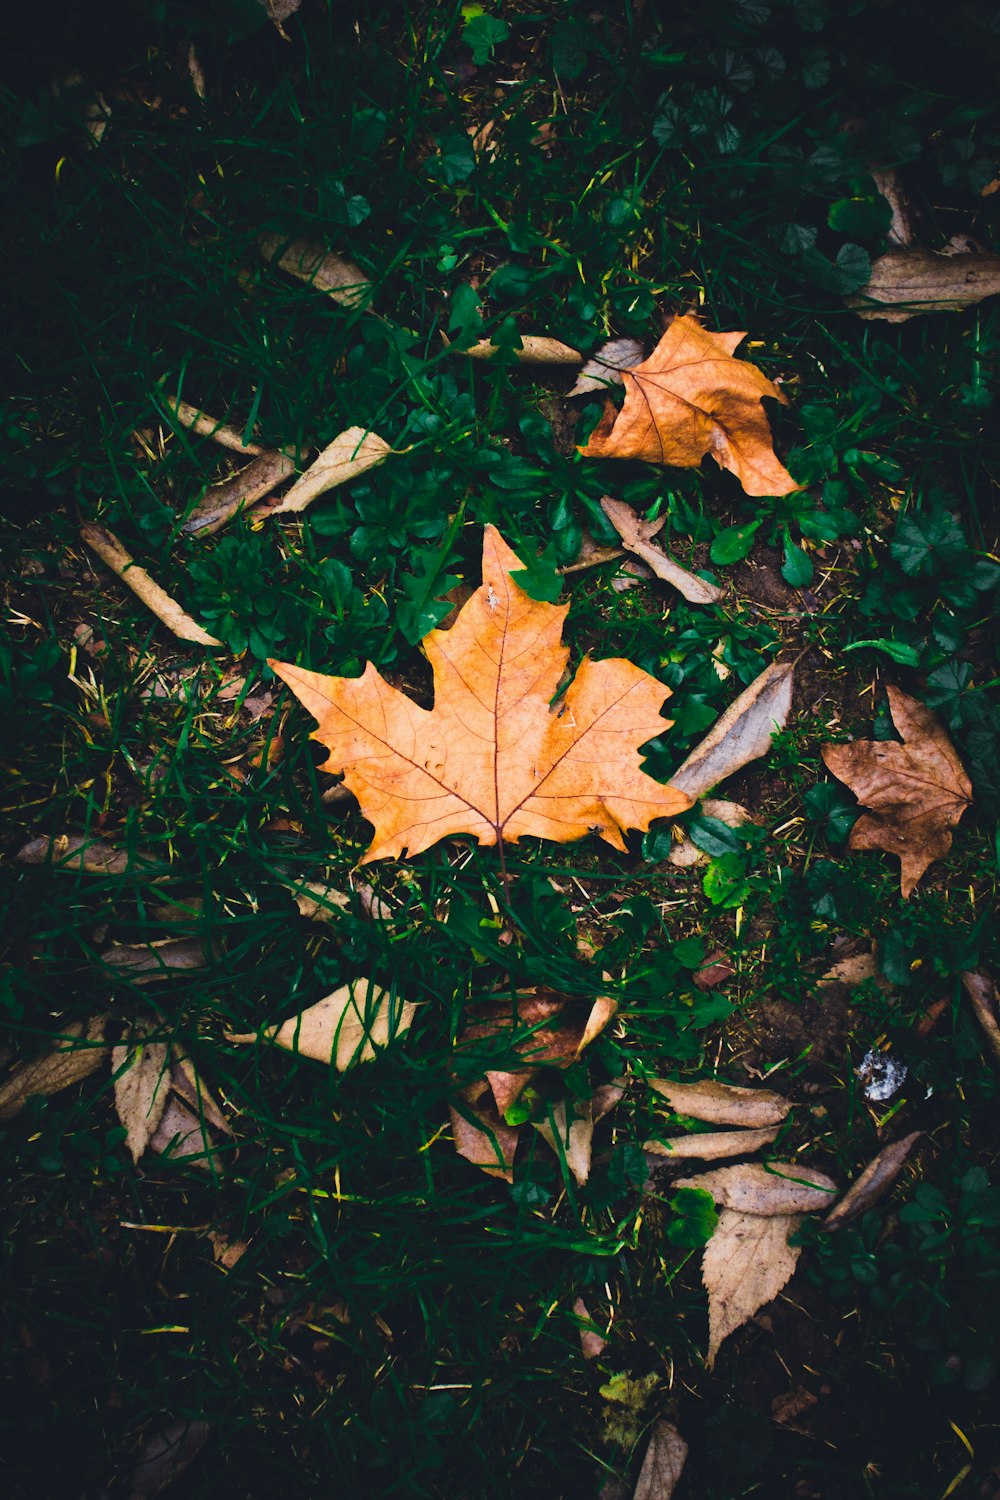 a fallen leaf laying on the ground in the grass